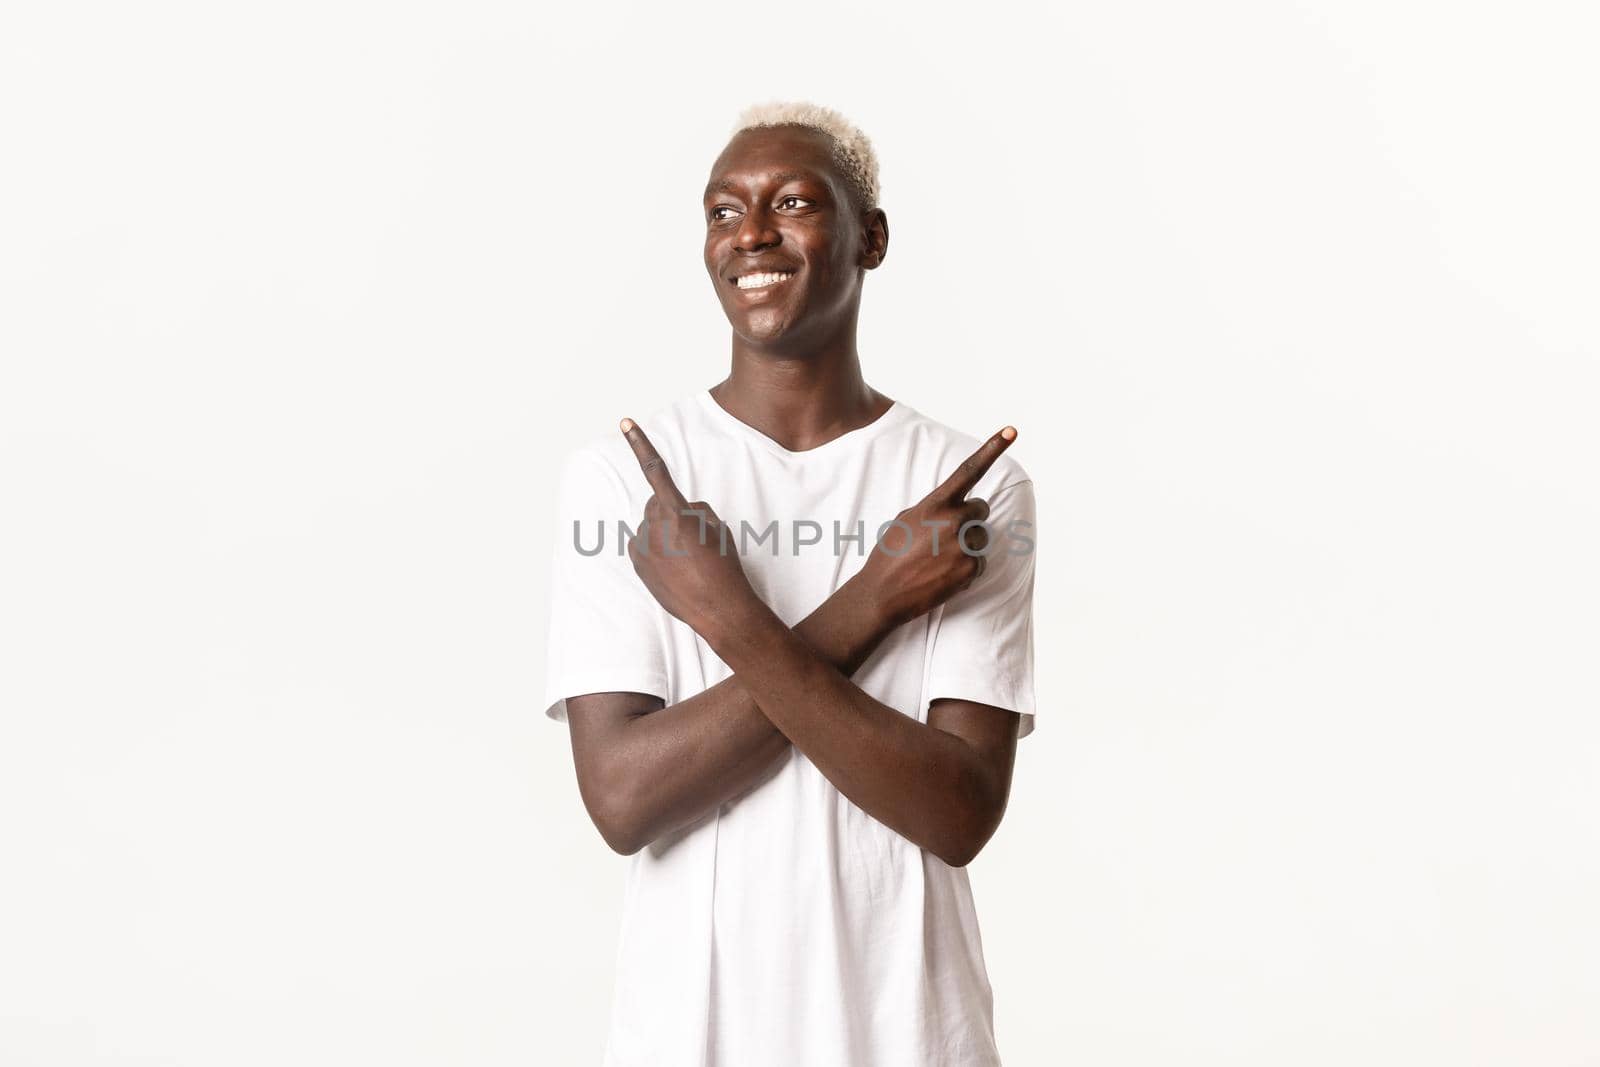 Portrait of hopeful smiling african-american guy, looking left pleased, pointing fingers sideways, standing white background.